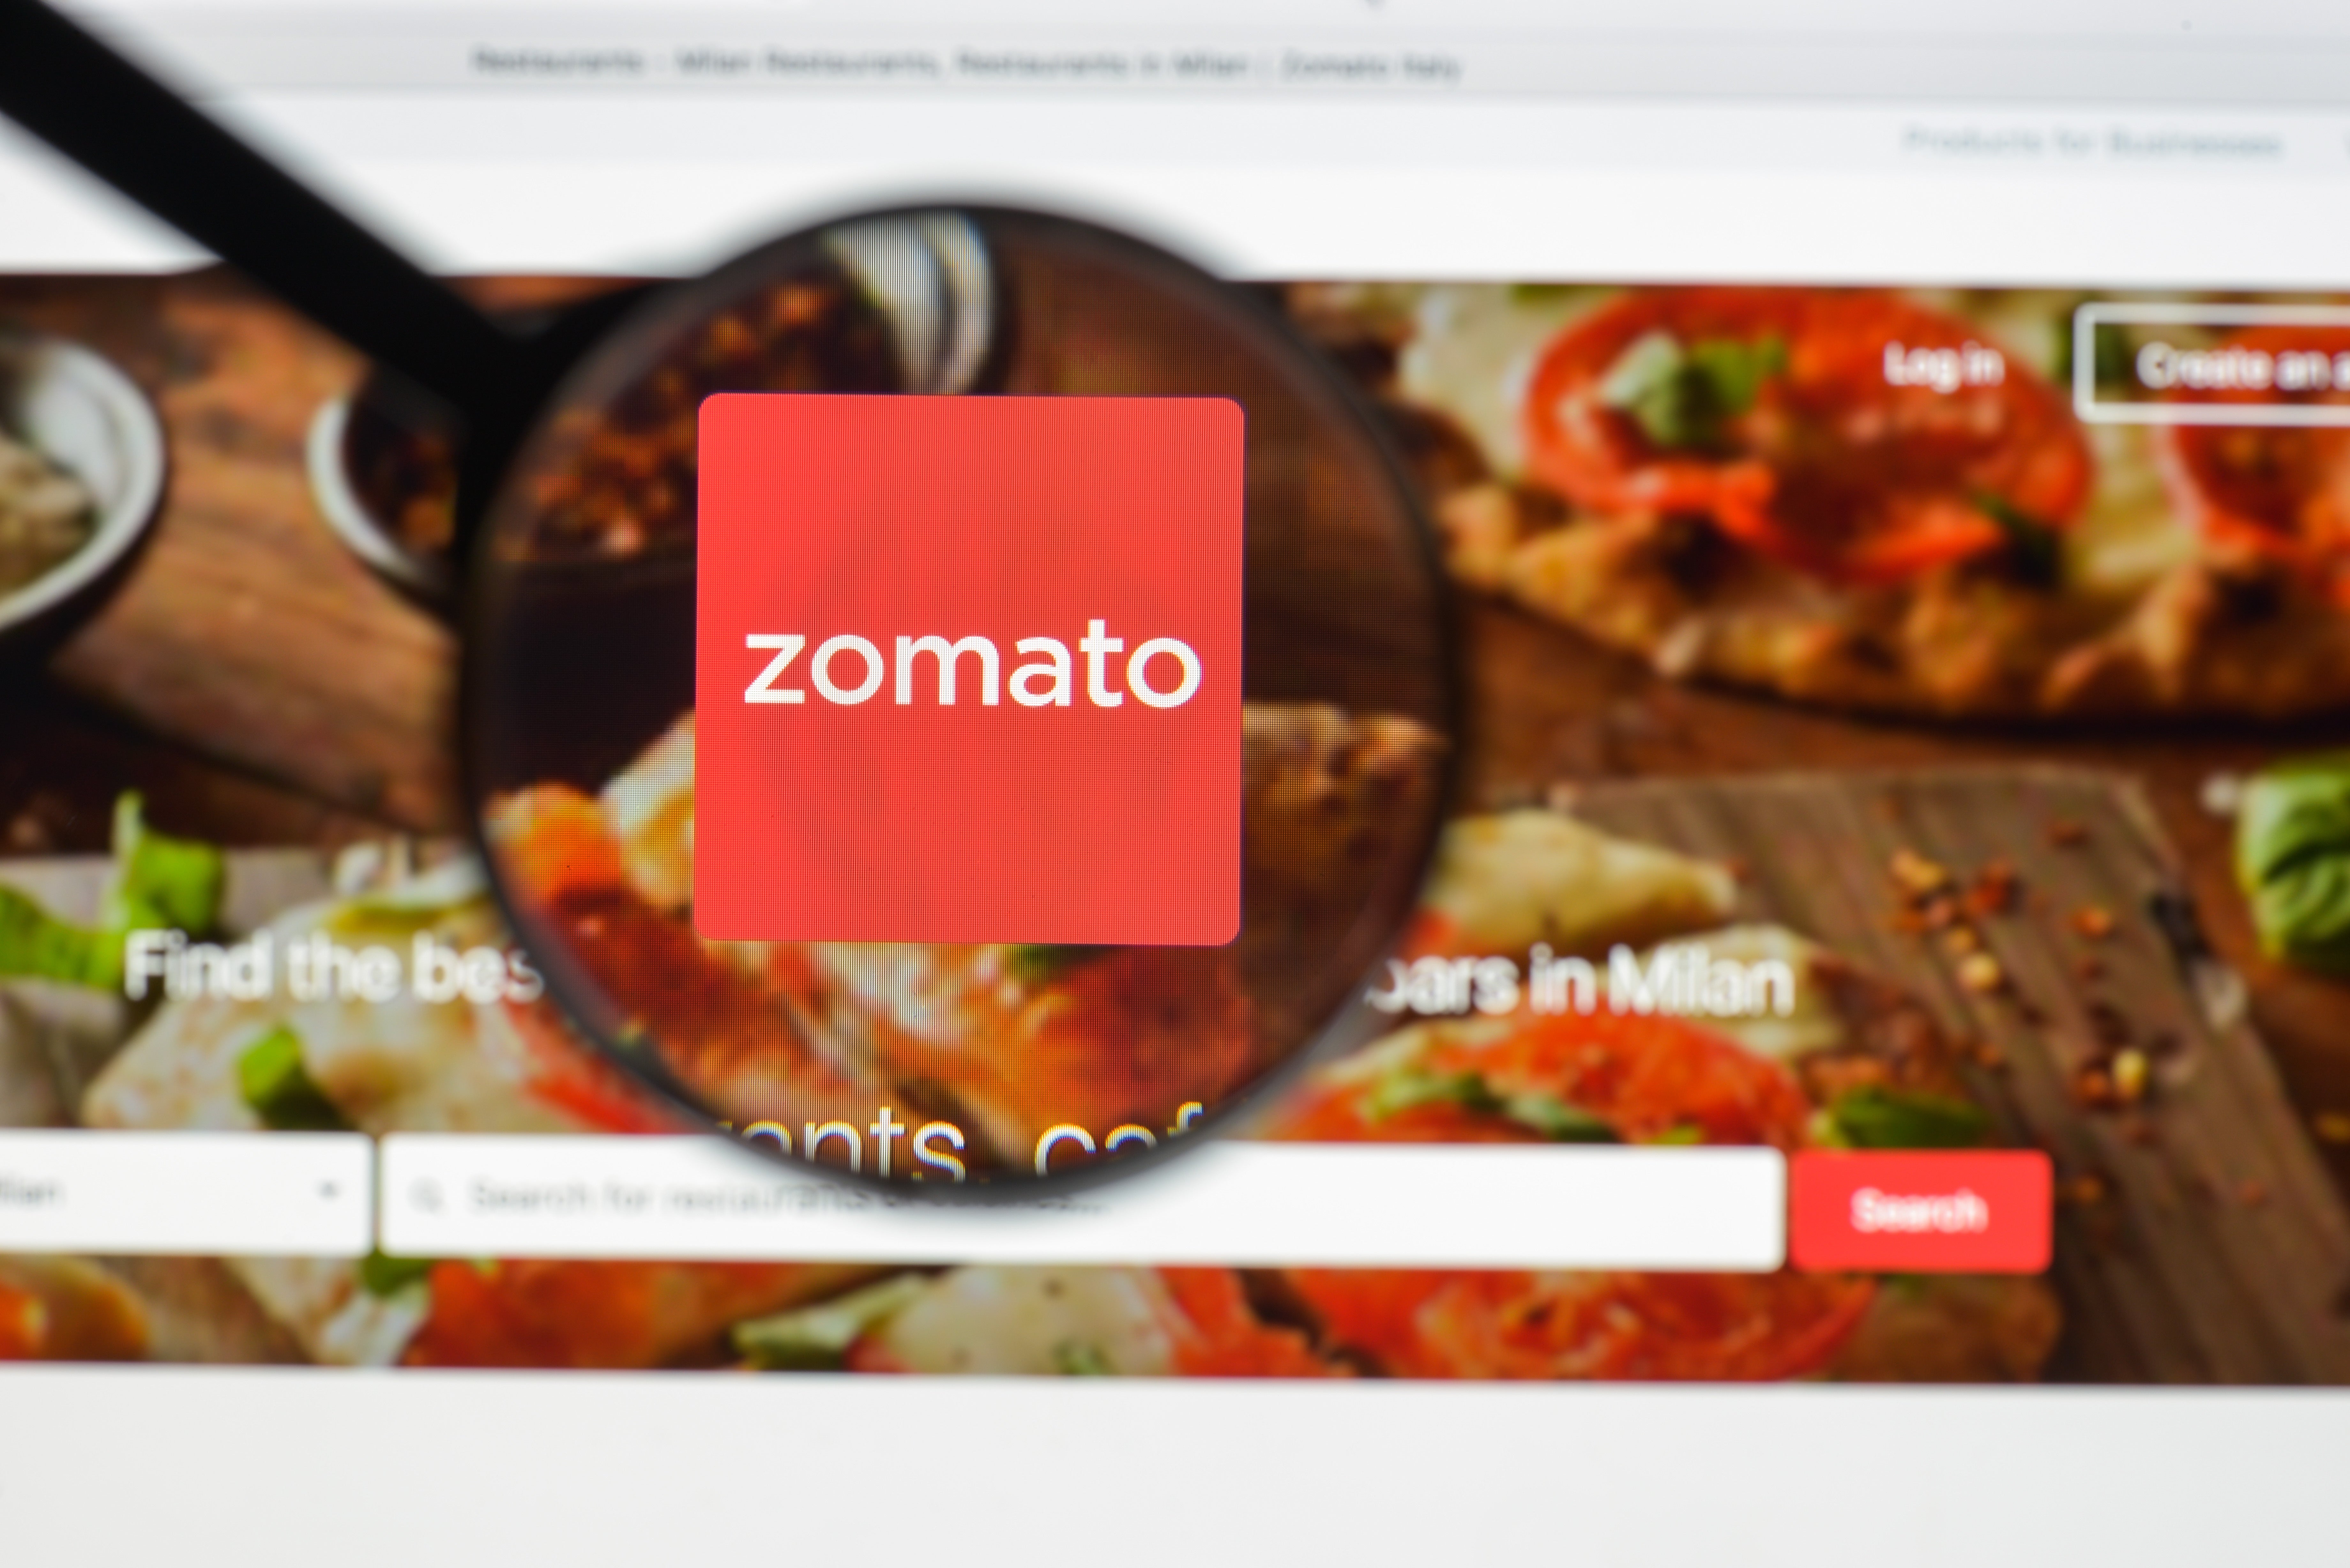 Alibaba-Backed Zomato Crashes Despite Narrowing Loss Over Reports Uber Might Cut Stake: What's Next?